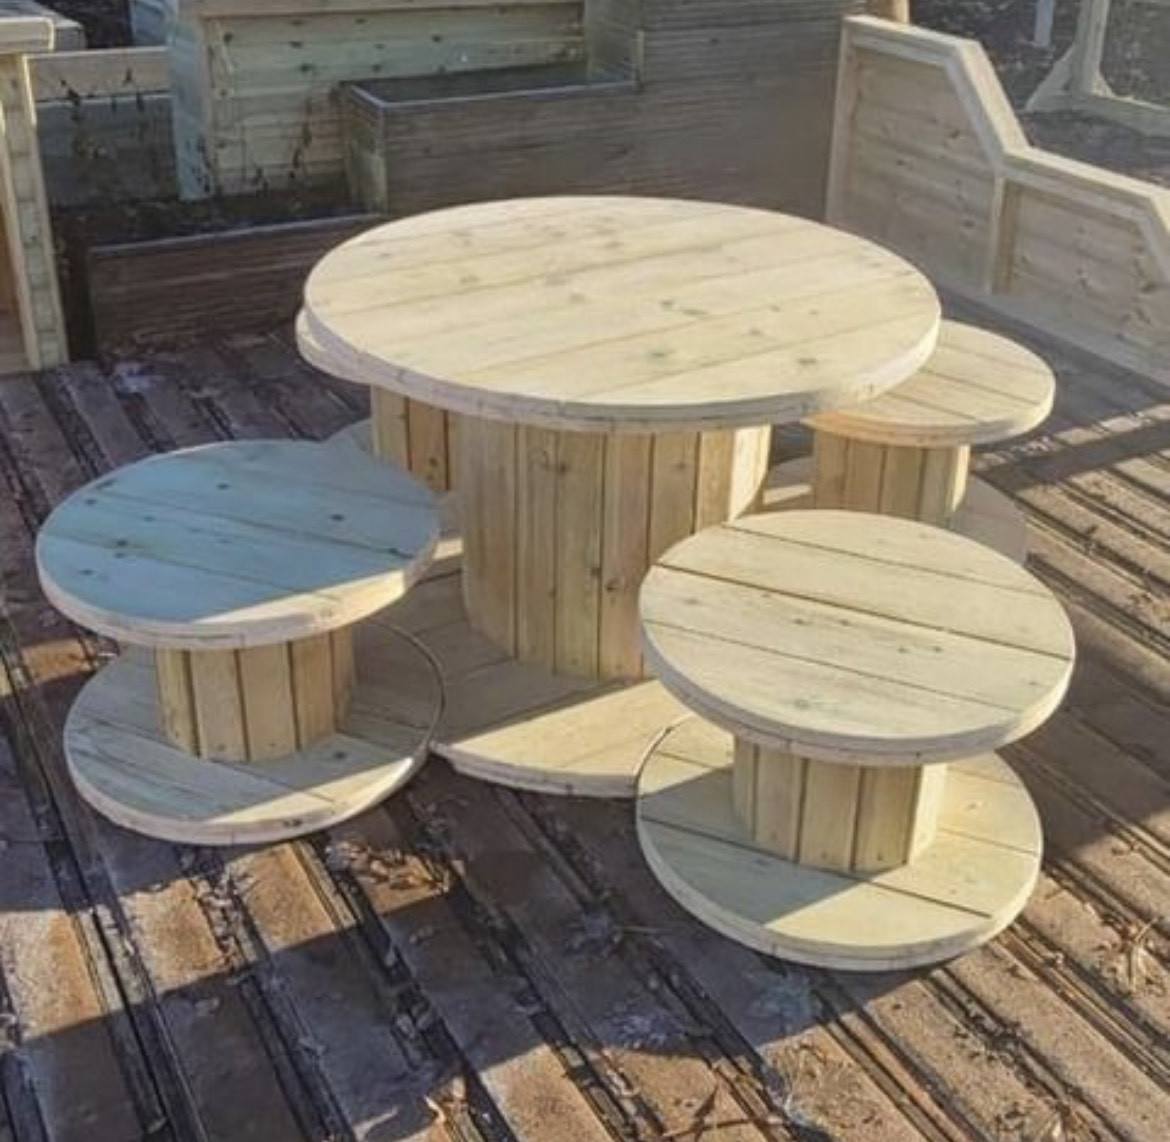 Cable Drum and Stools - Landscapes 4 Learning